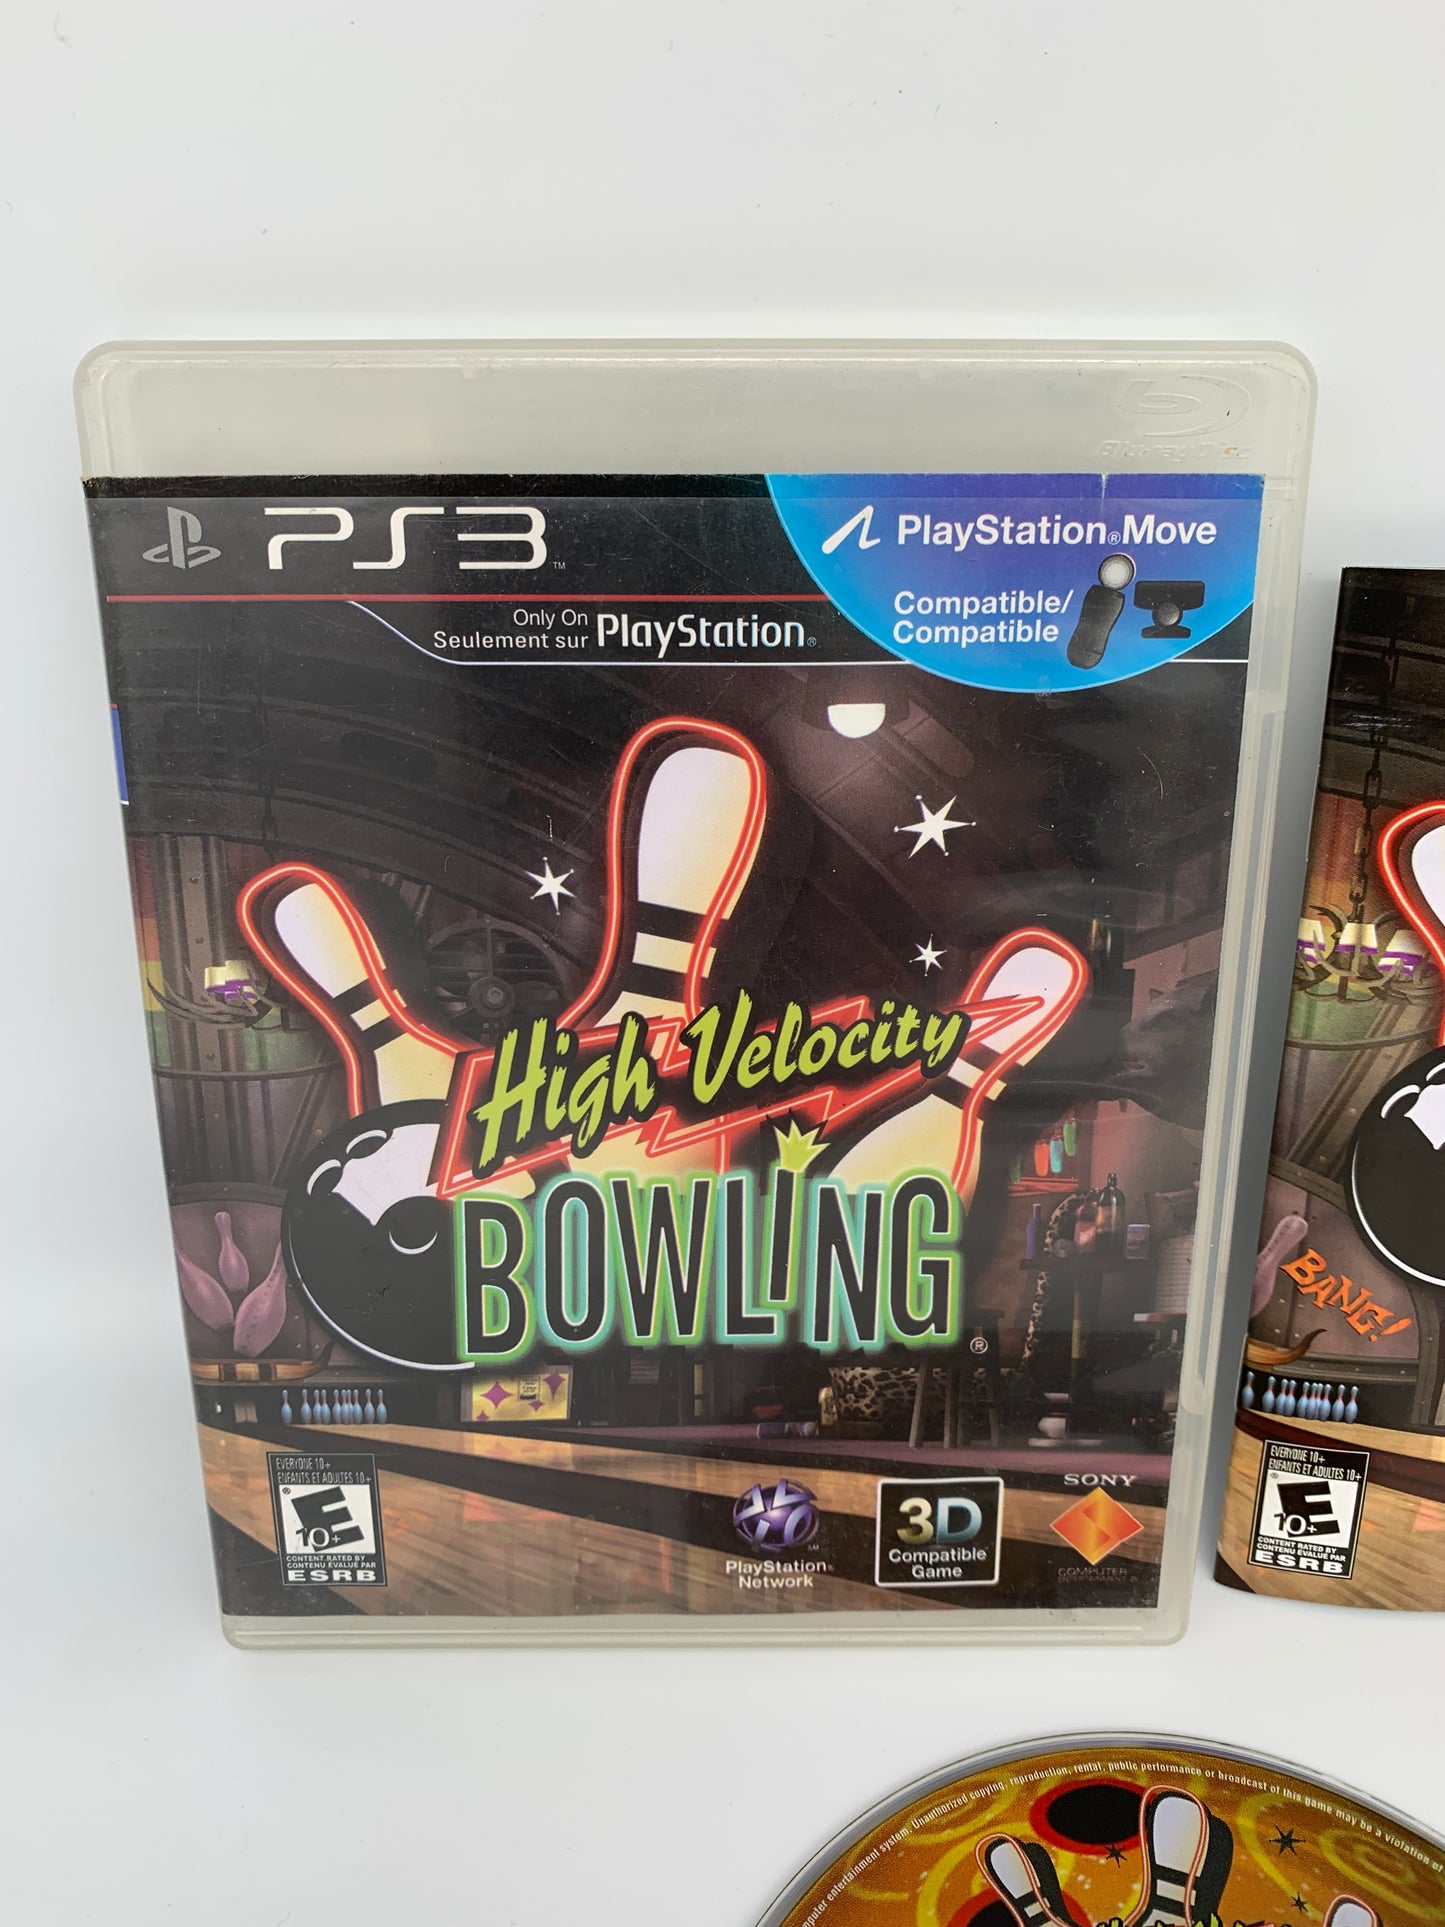 SONY PLAYSTATiON 3 [PS3] | HiGH VELOCiTY BOWLiNG